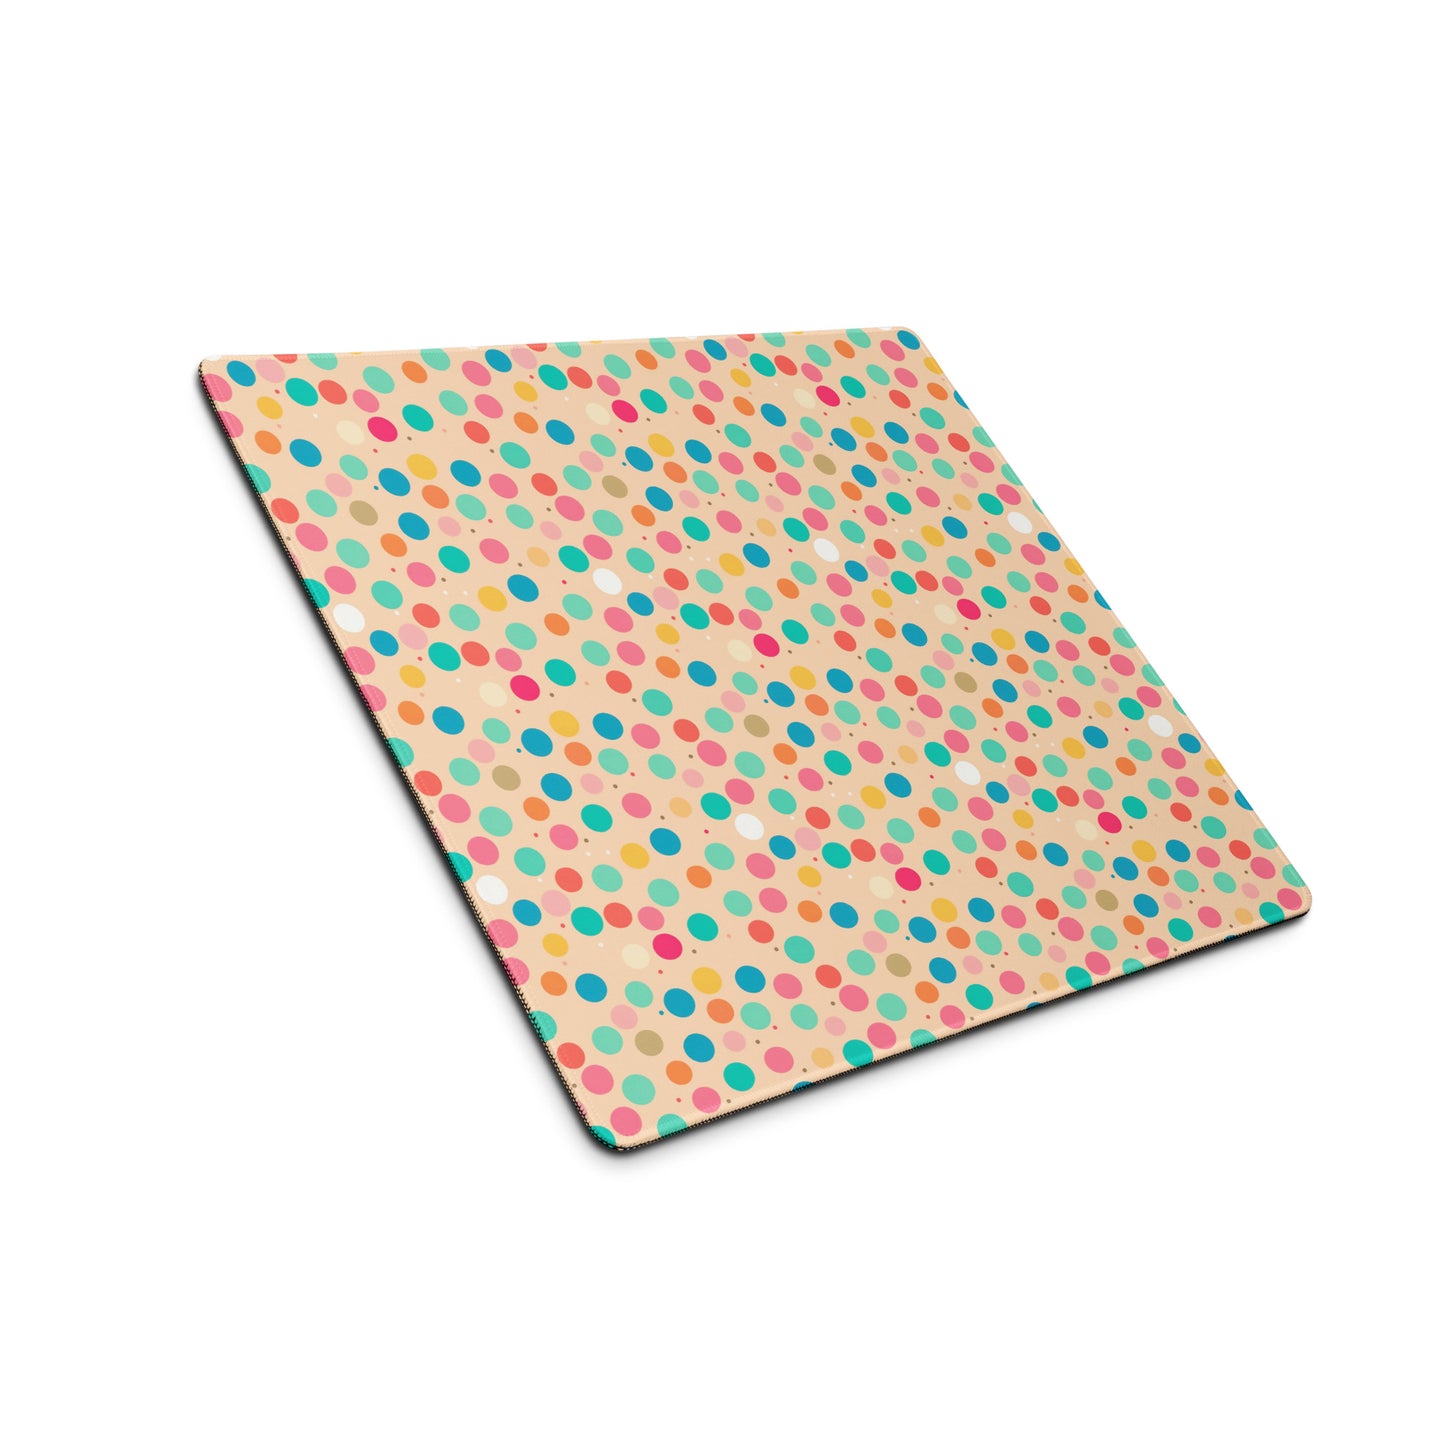 A 18" x 16" desk pad with a colorful polka dot pattern sitting at an angle.